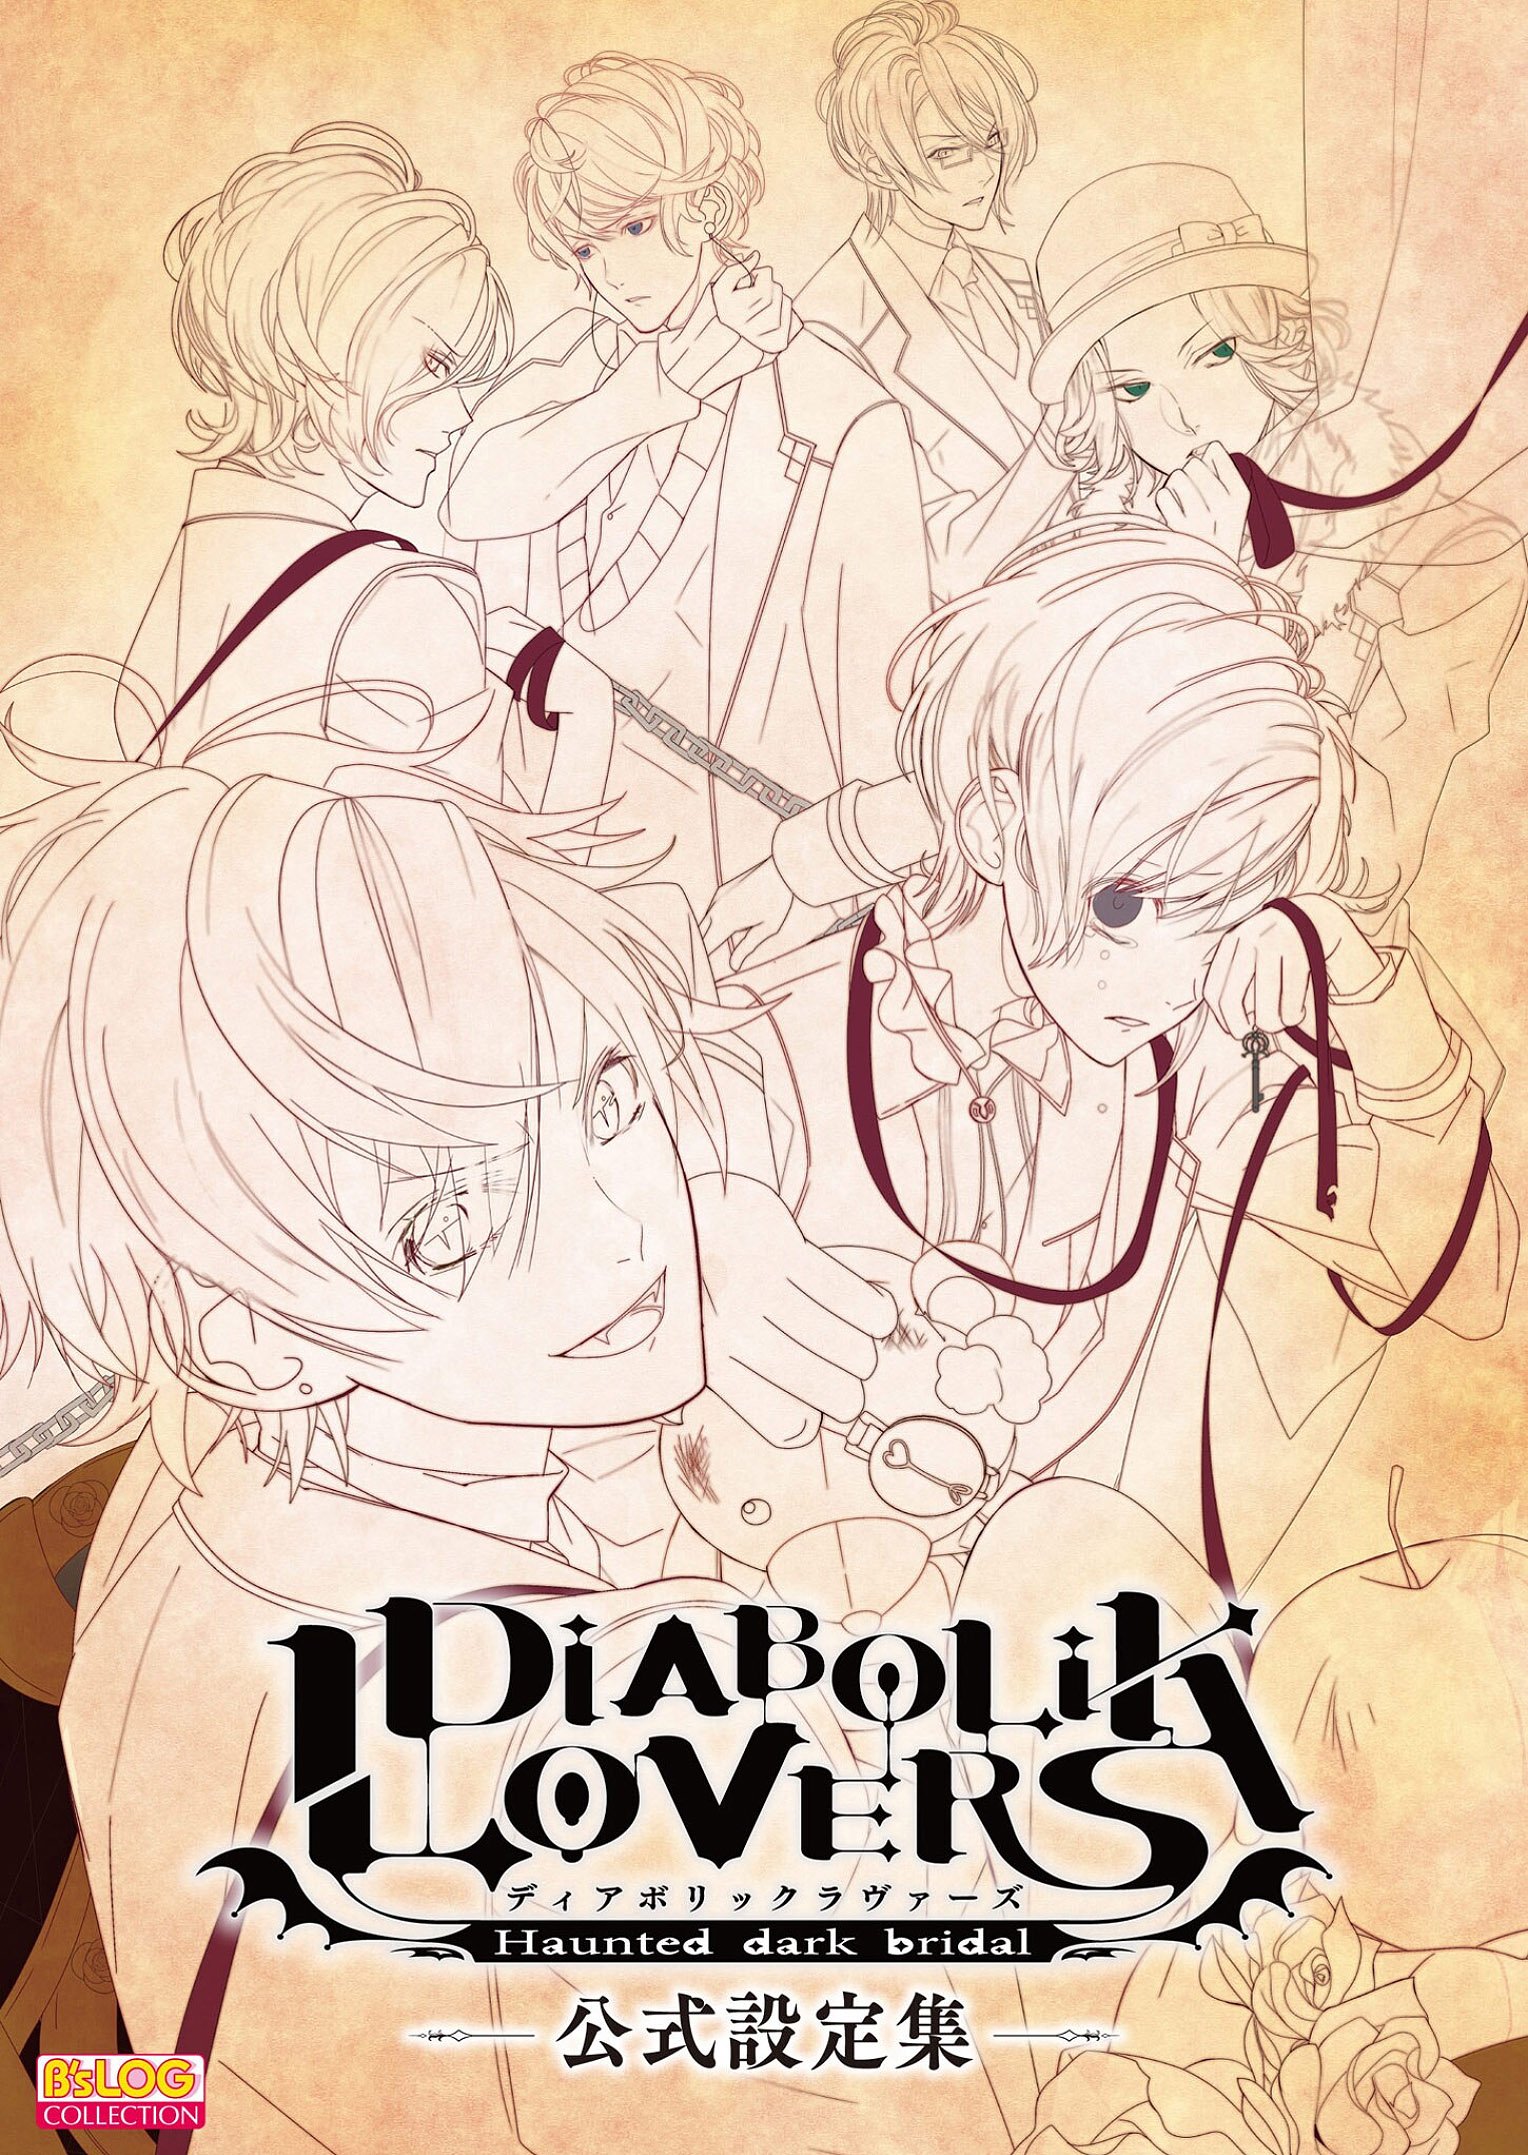 Diabolik Lovers - Official Setting Collection